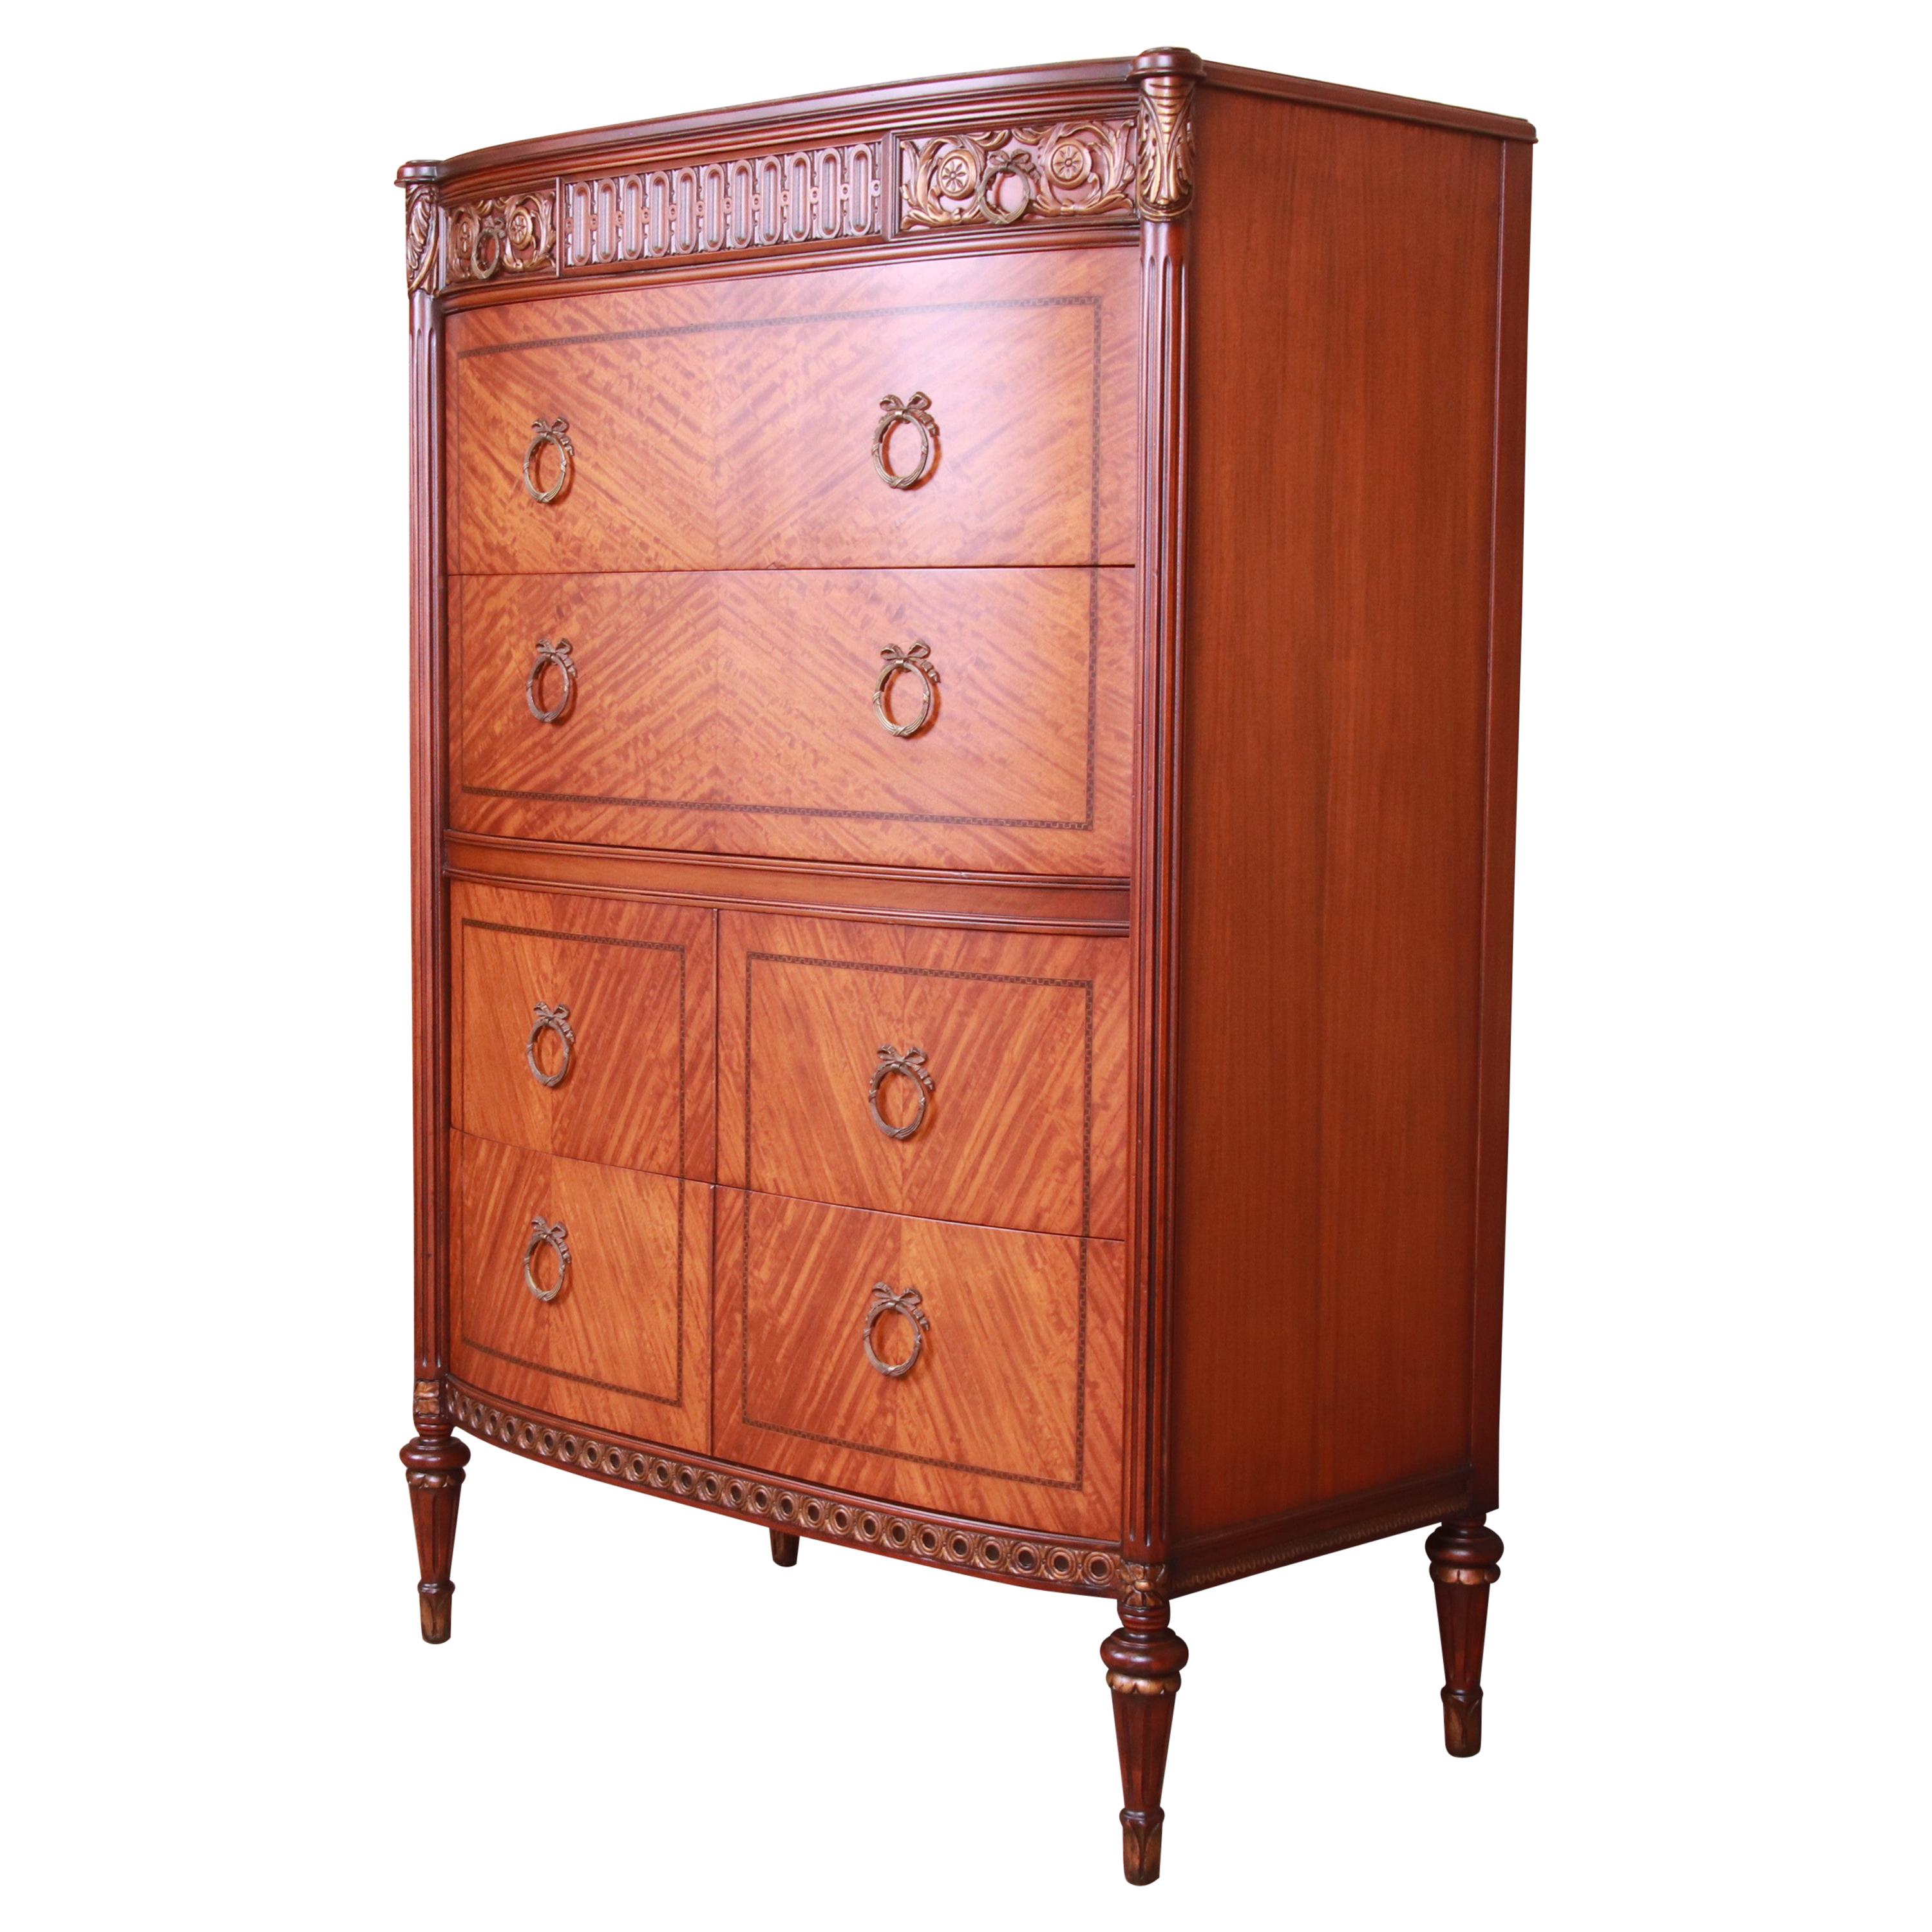 Antique French Louis XVI Satinwood and Mahogany Highboy Dresser by Saginaw